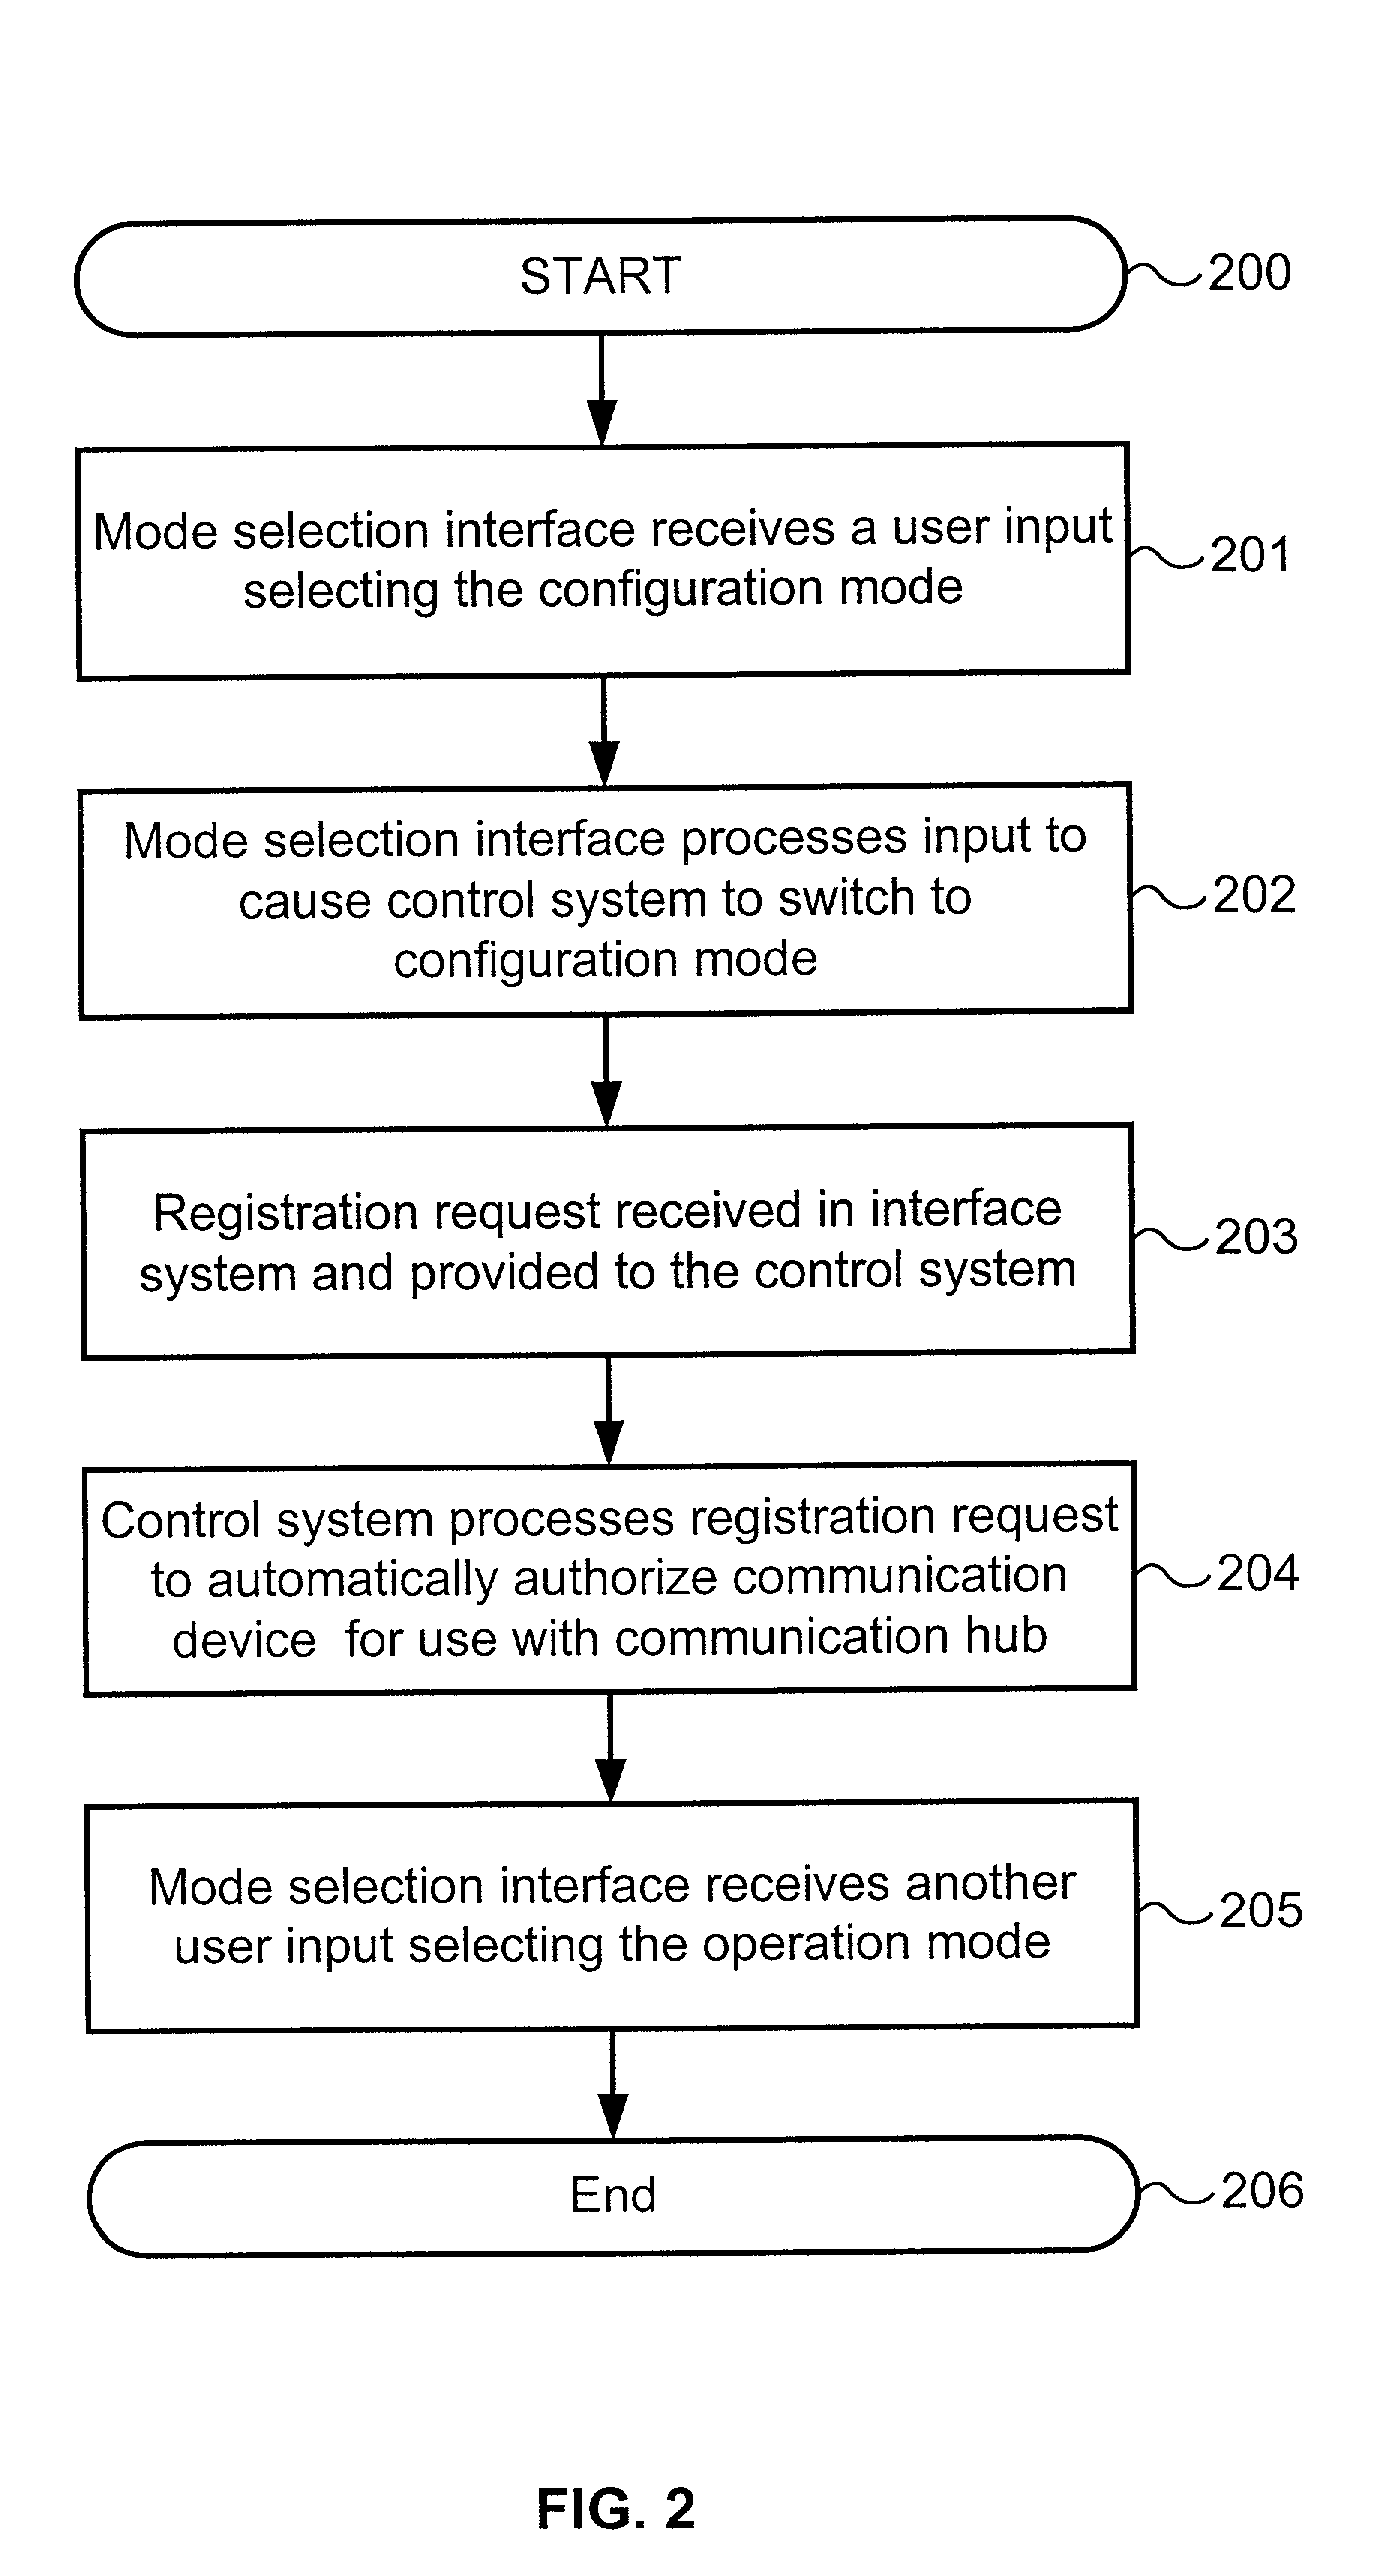 Communication hub with automatic device registration